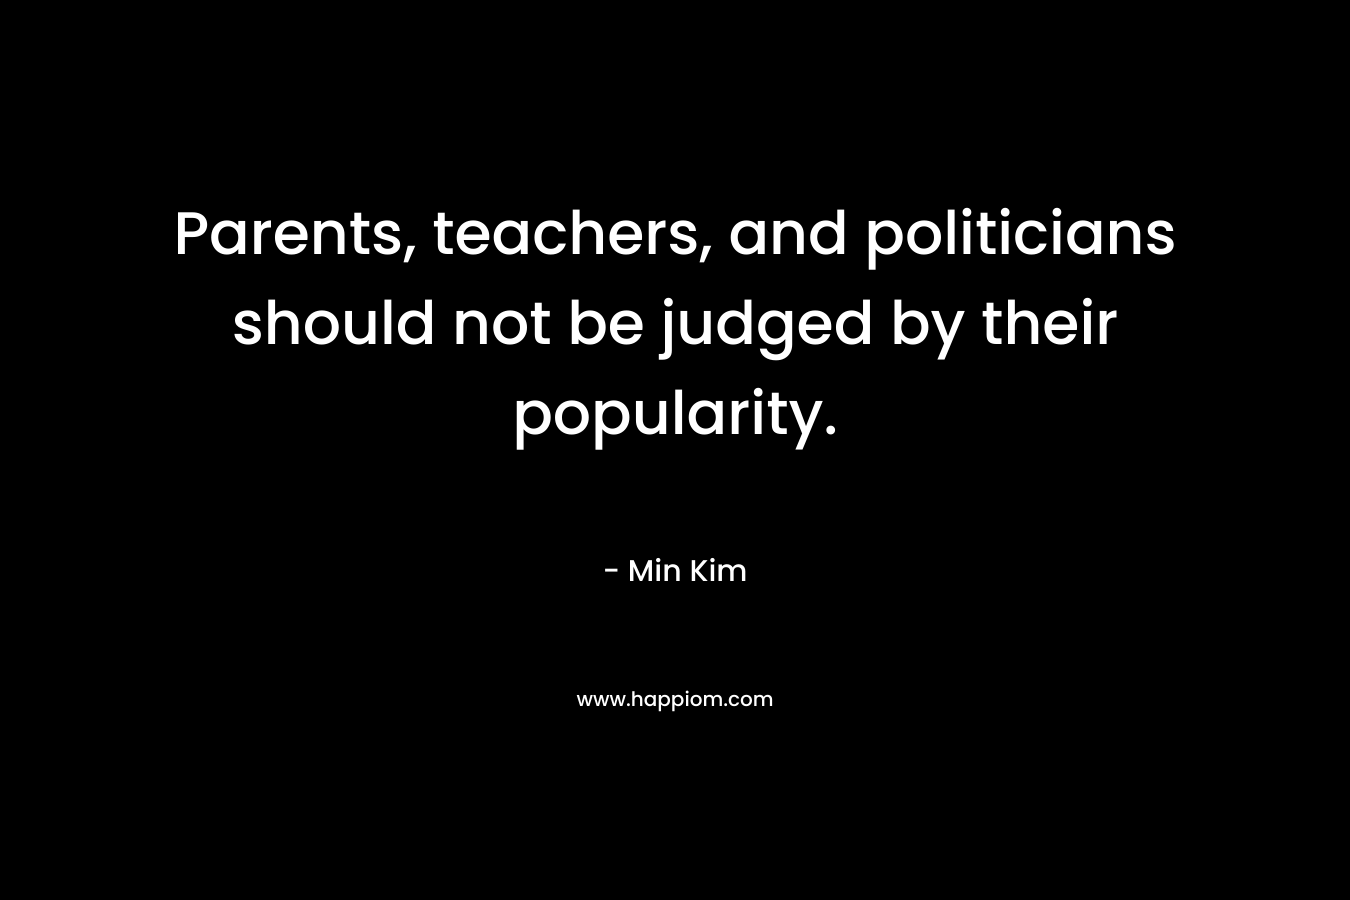 Parents, teachers, and politicians should not be judged by their popularity.